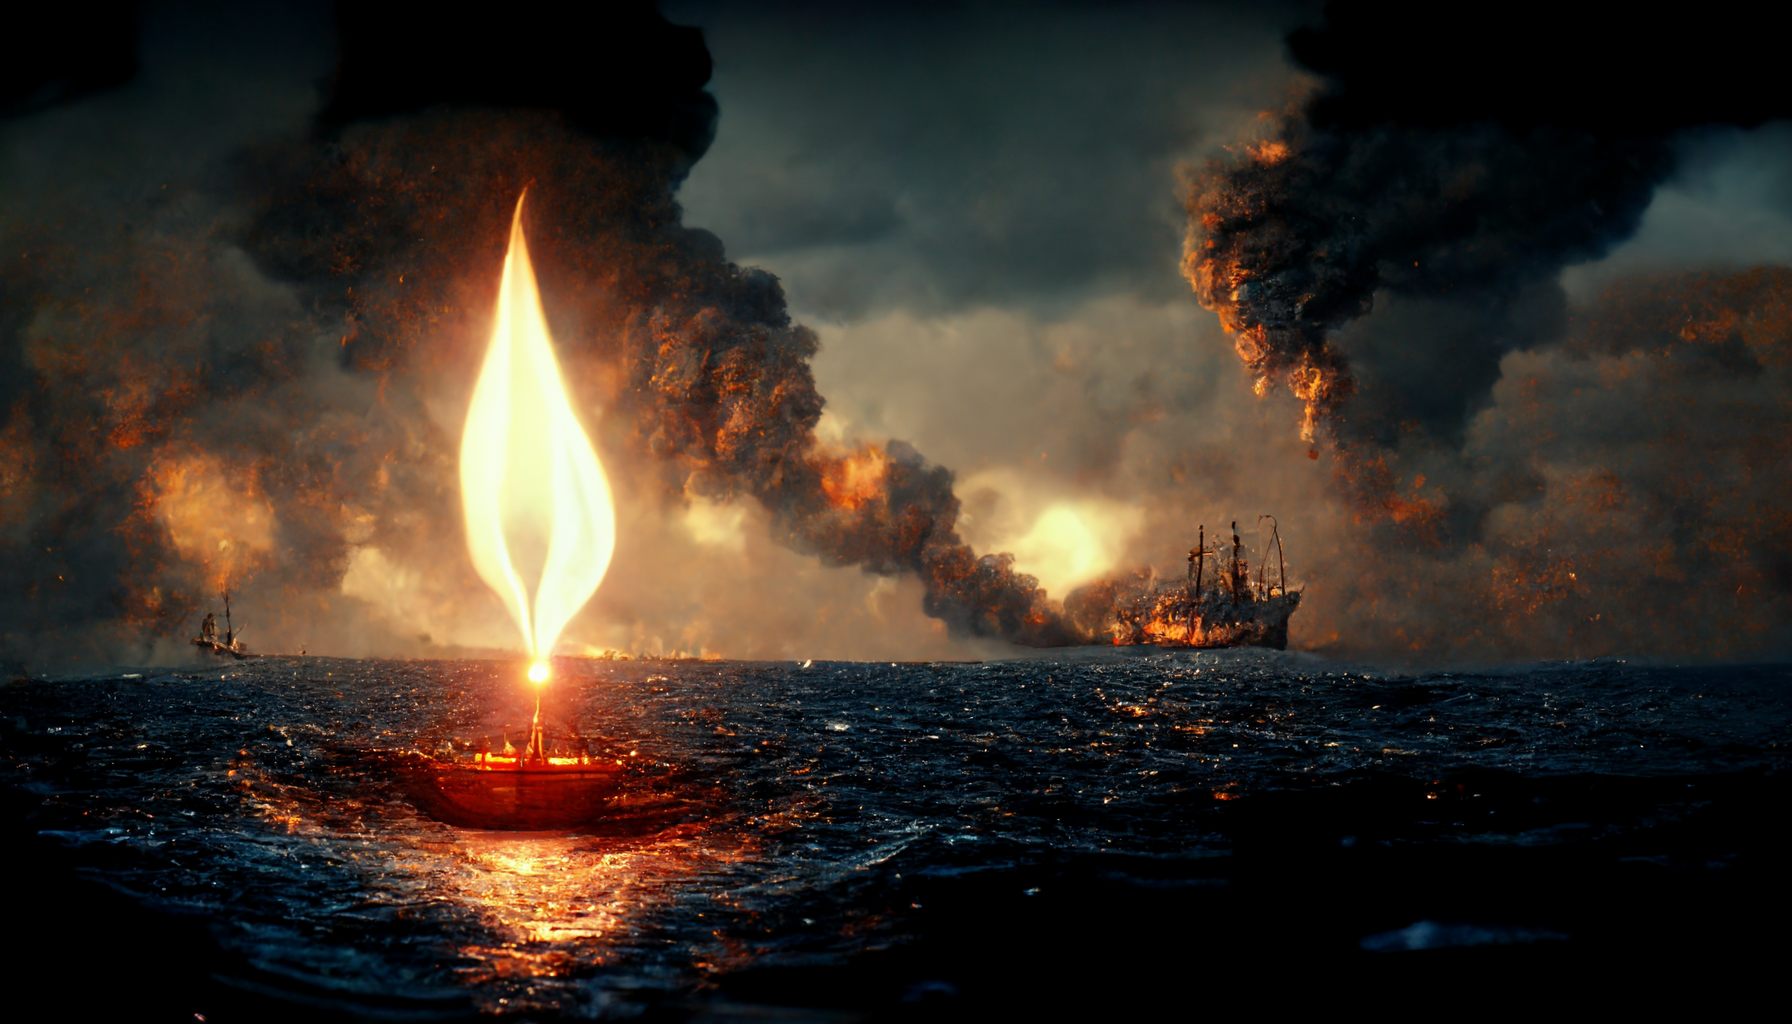 mattlee_A_mysterious_flame_seen_over_the_seas_cinematic_realist_9d4dc85c-7b52-490c-bd48-a72b632986e6